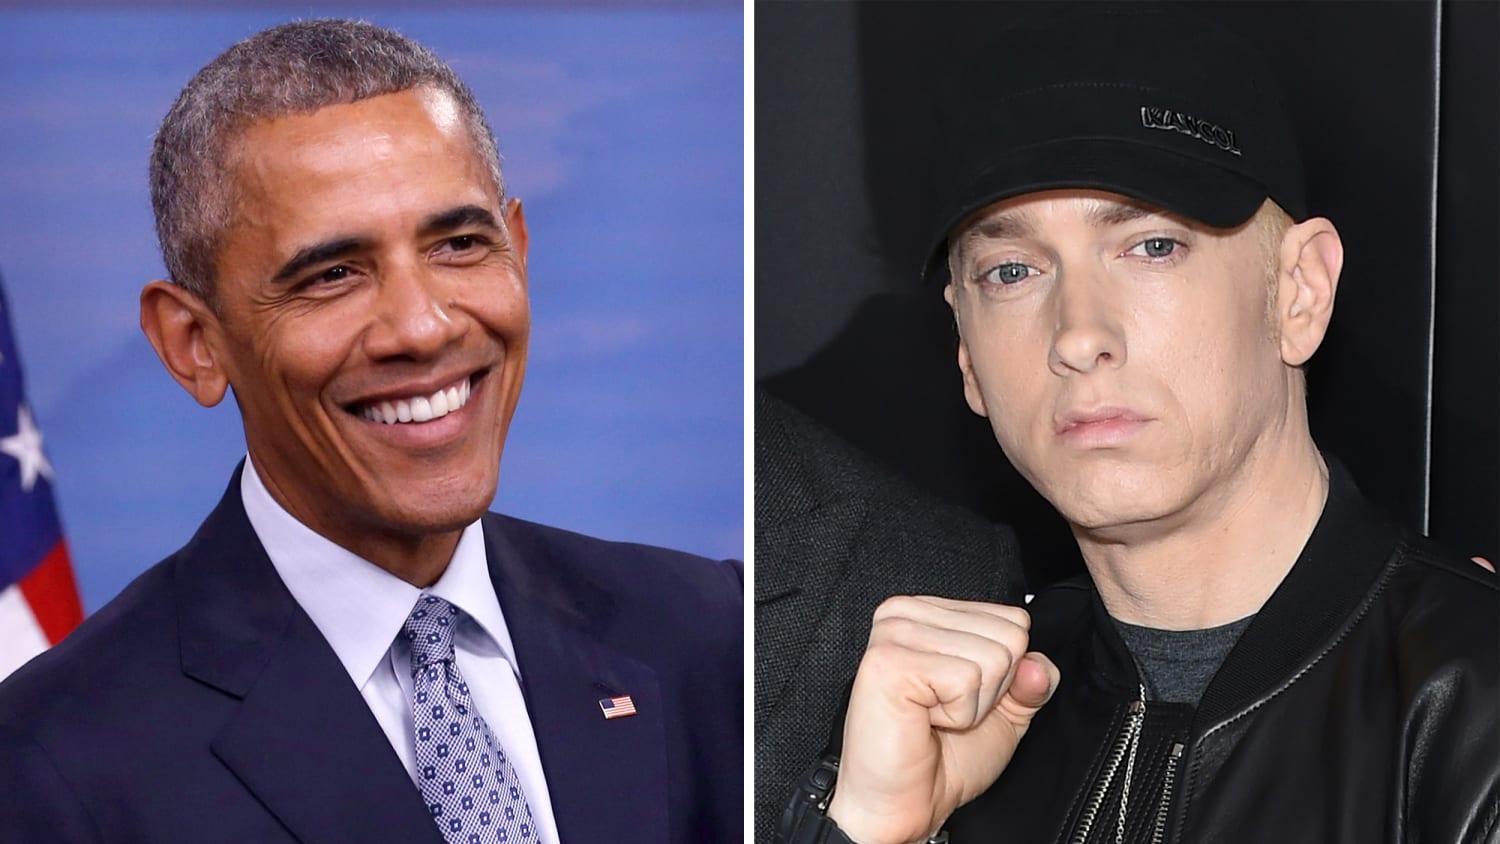 President Obama got pumped for his DNC speech with Eminem's 'Lose Yourself' - TODAY.com